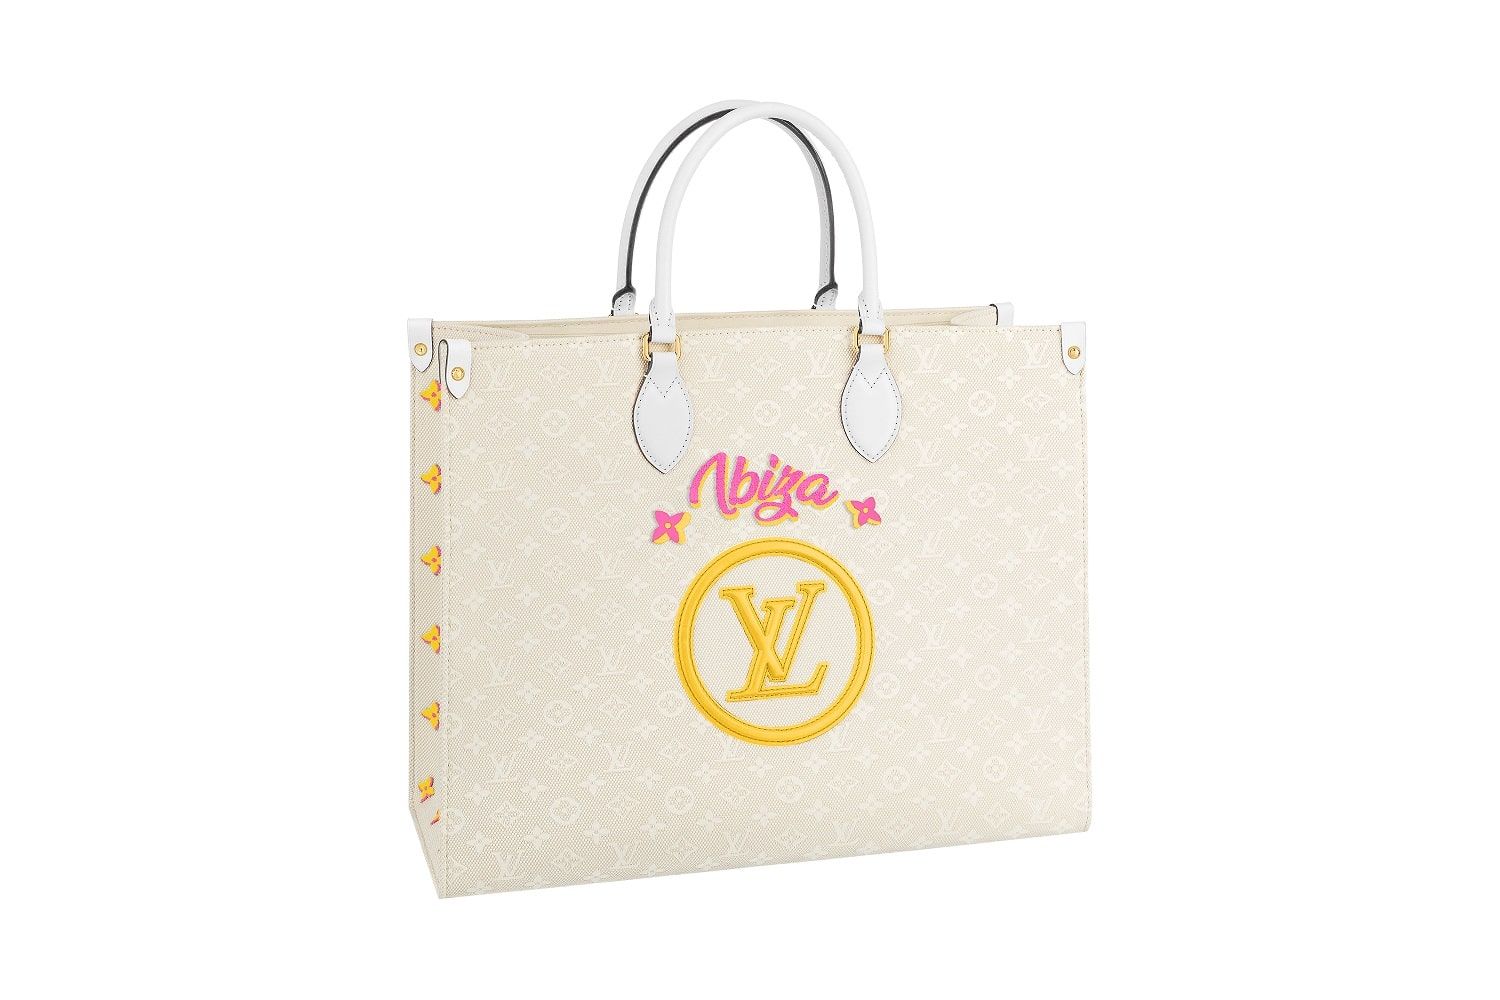 Louis Vuitton Launches New Flower Bag and Accessory Line with 4